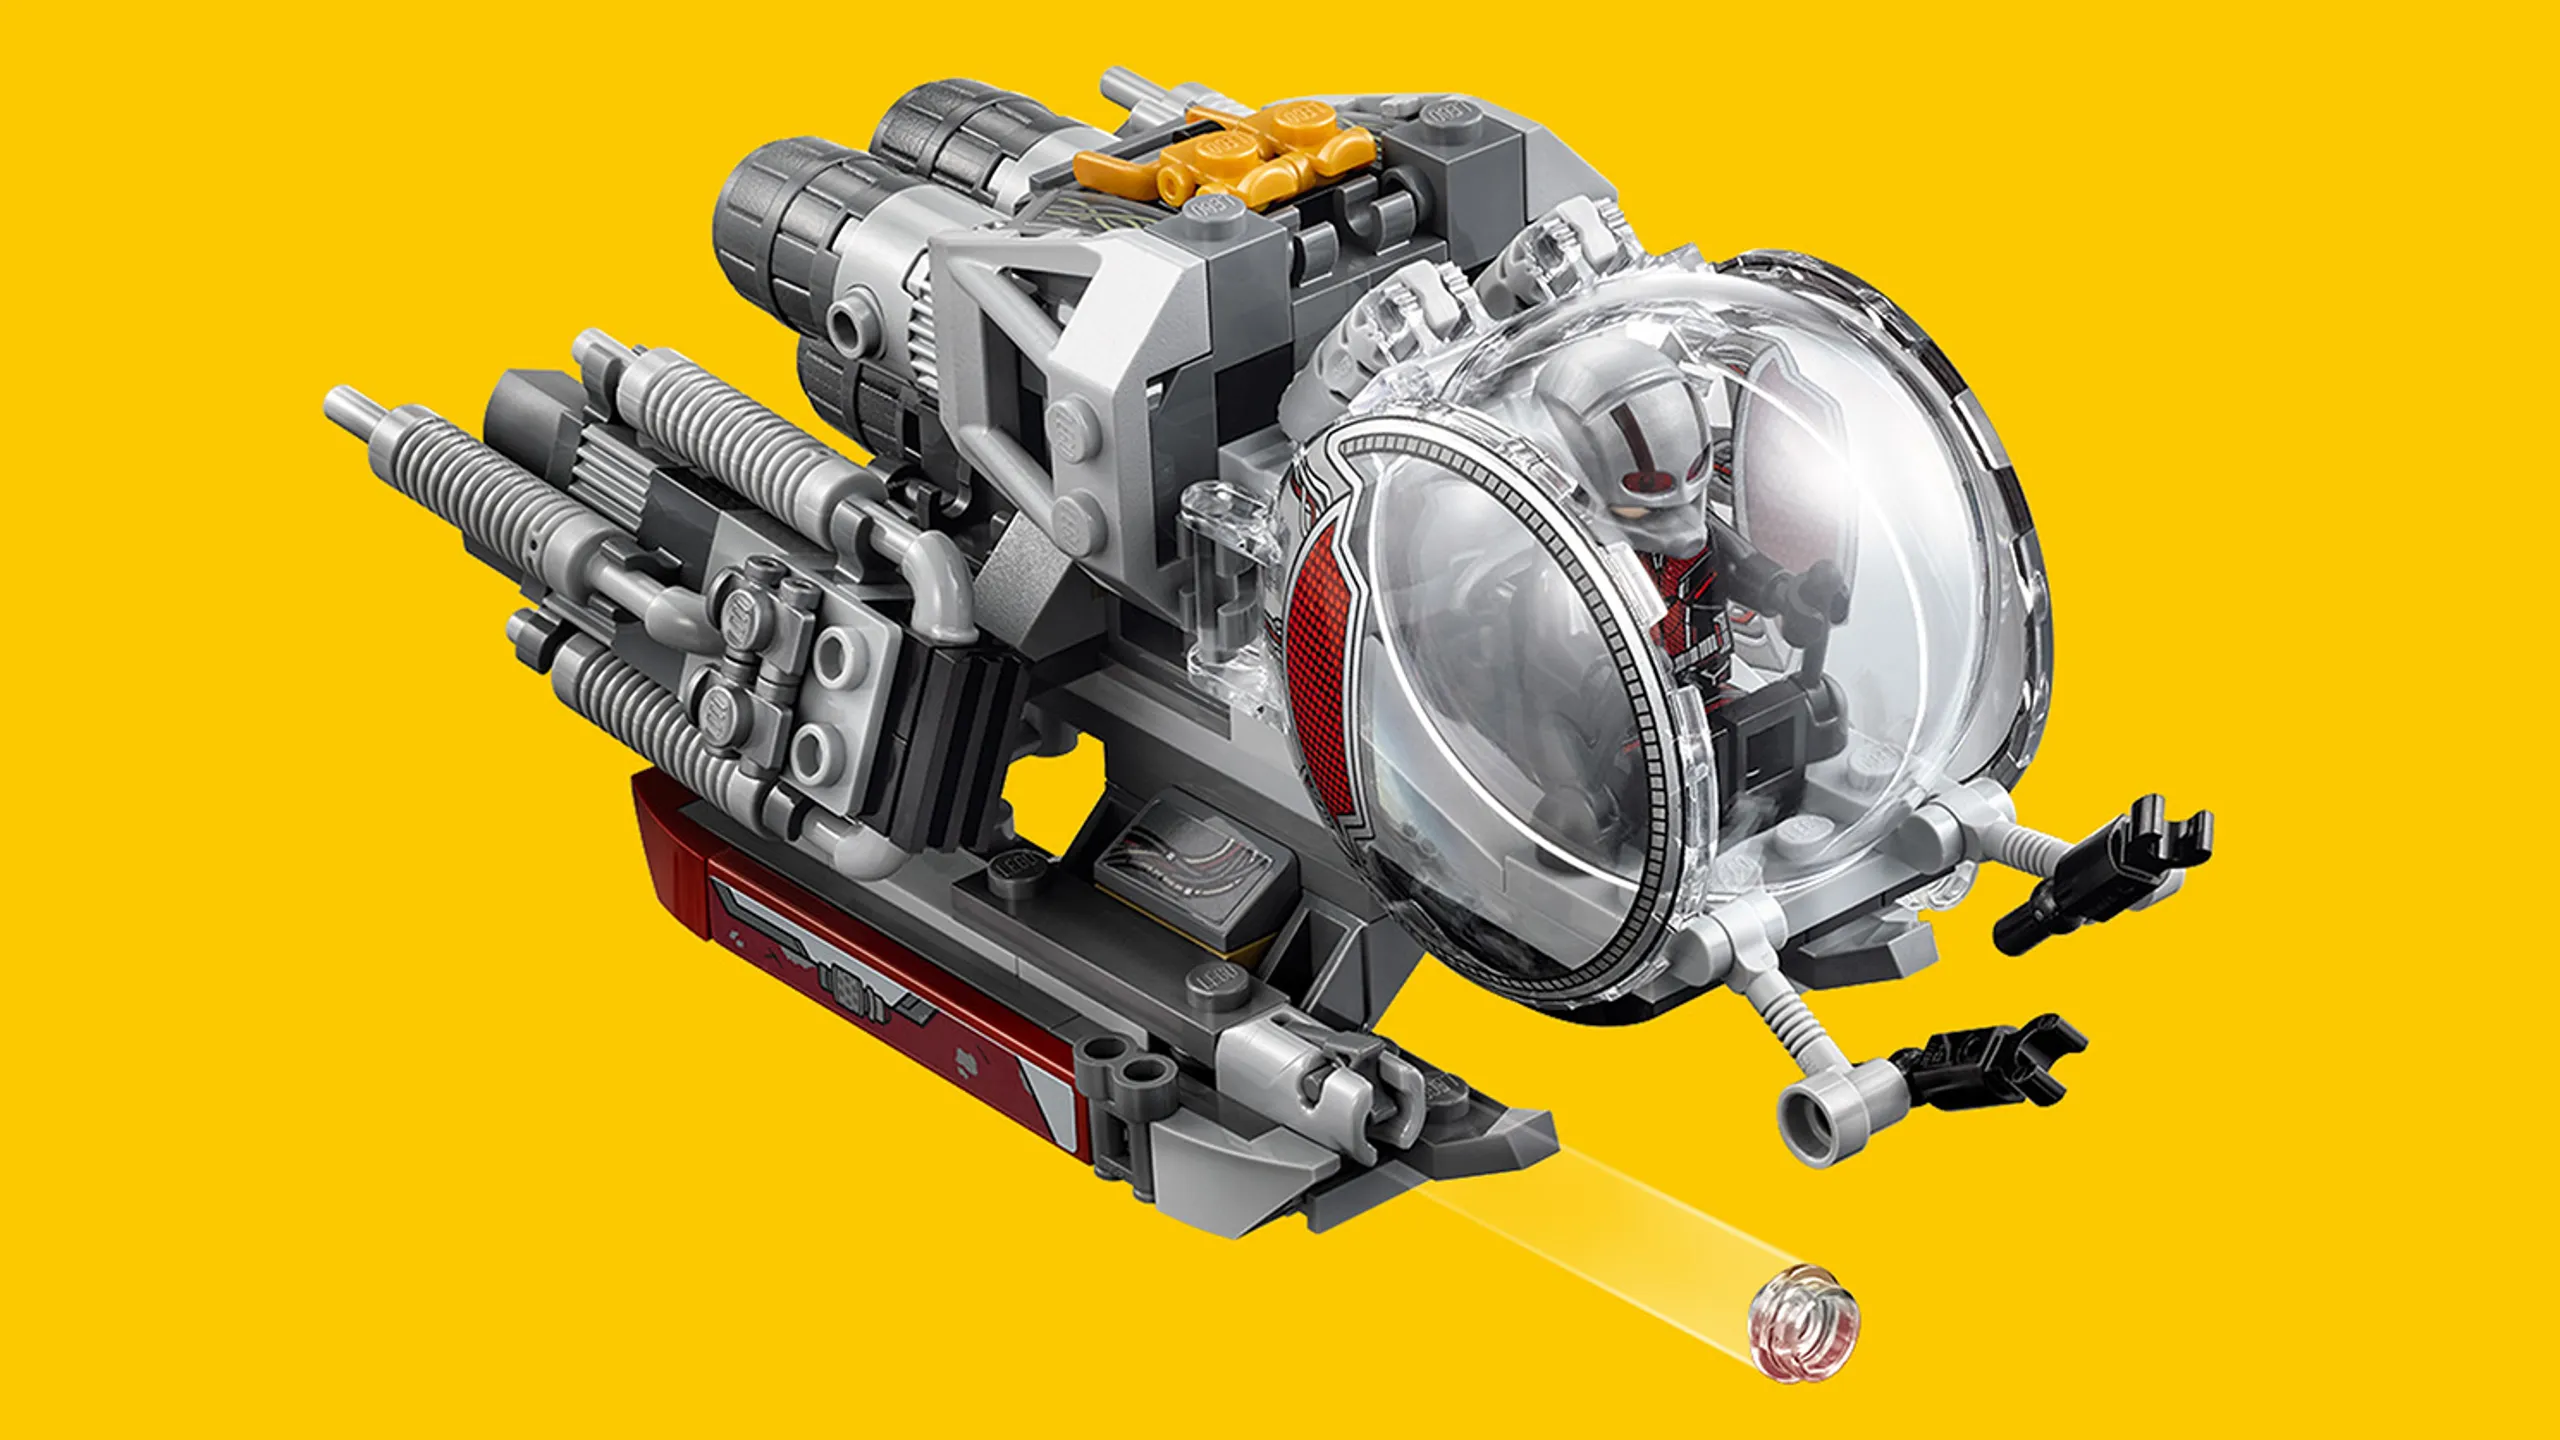 LEGO Super Heroes - 76109 Quantum Realm Explorers - Fire stud shooters from the Quantum Vehicle and use its grabbing arms.